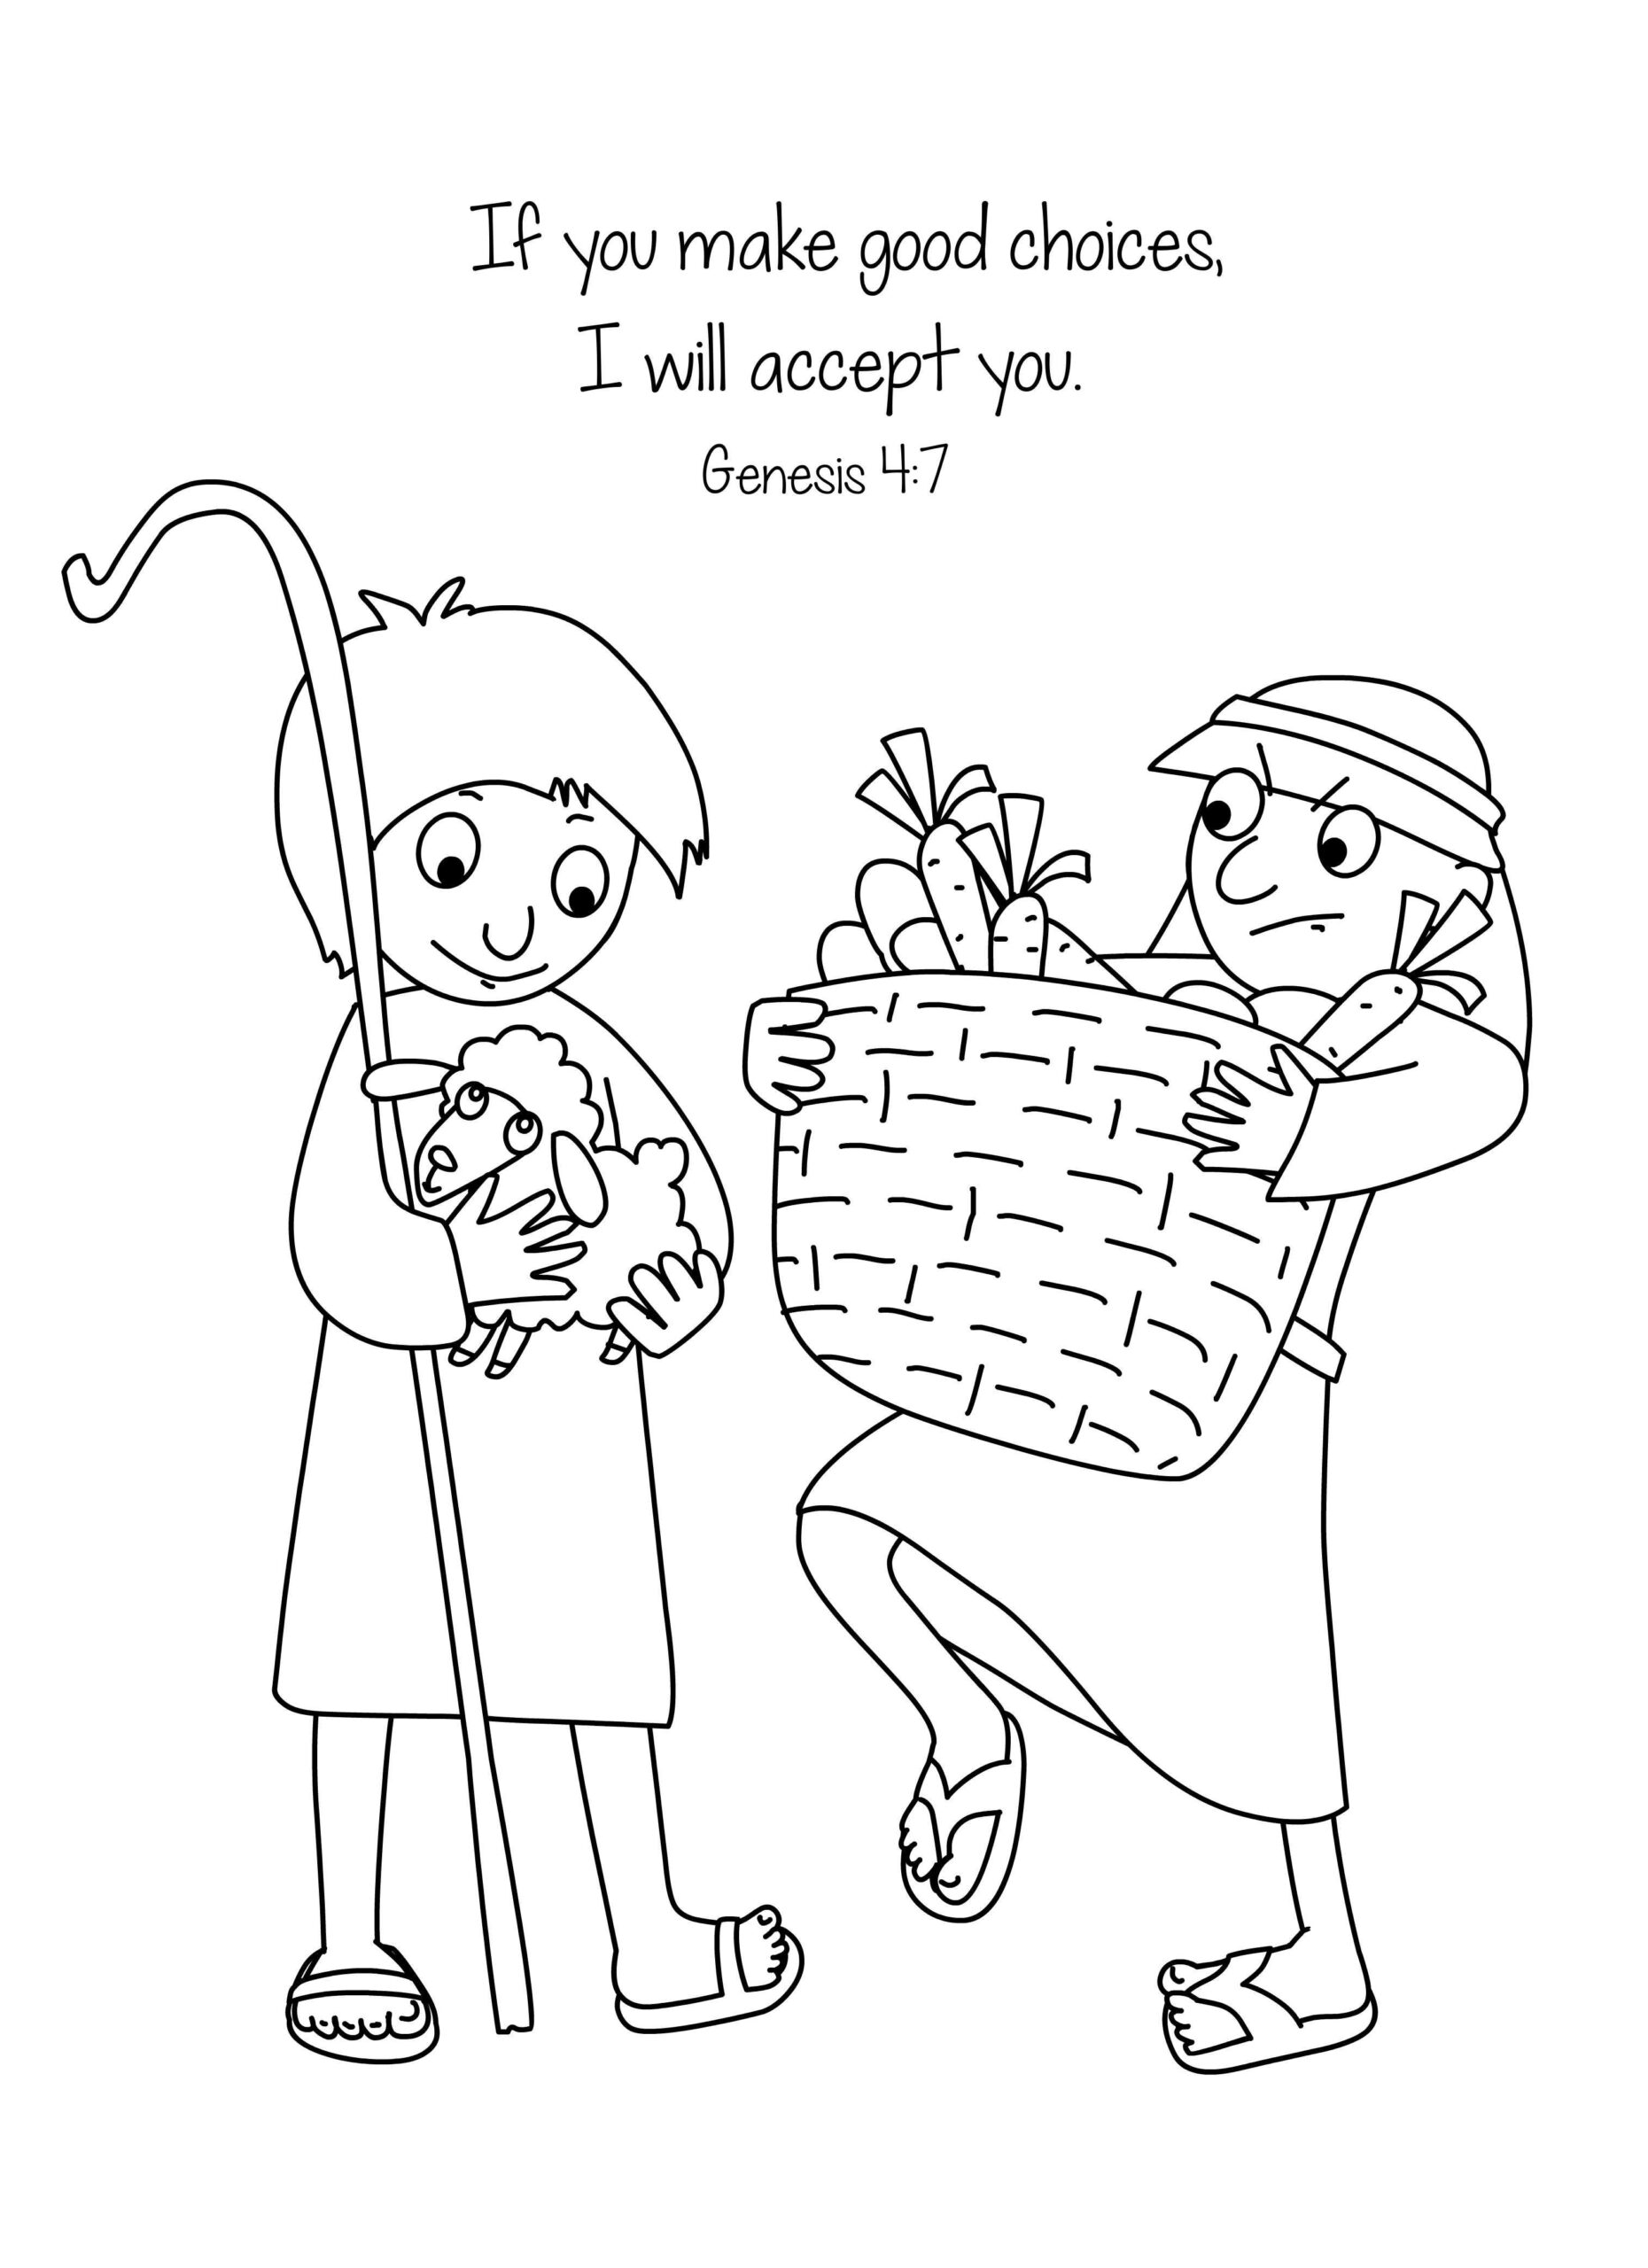 Preschoolbiblestudies Bible Coloring Pages Bible Coloring Cain And Abel